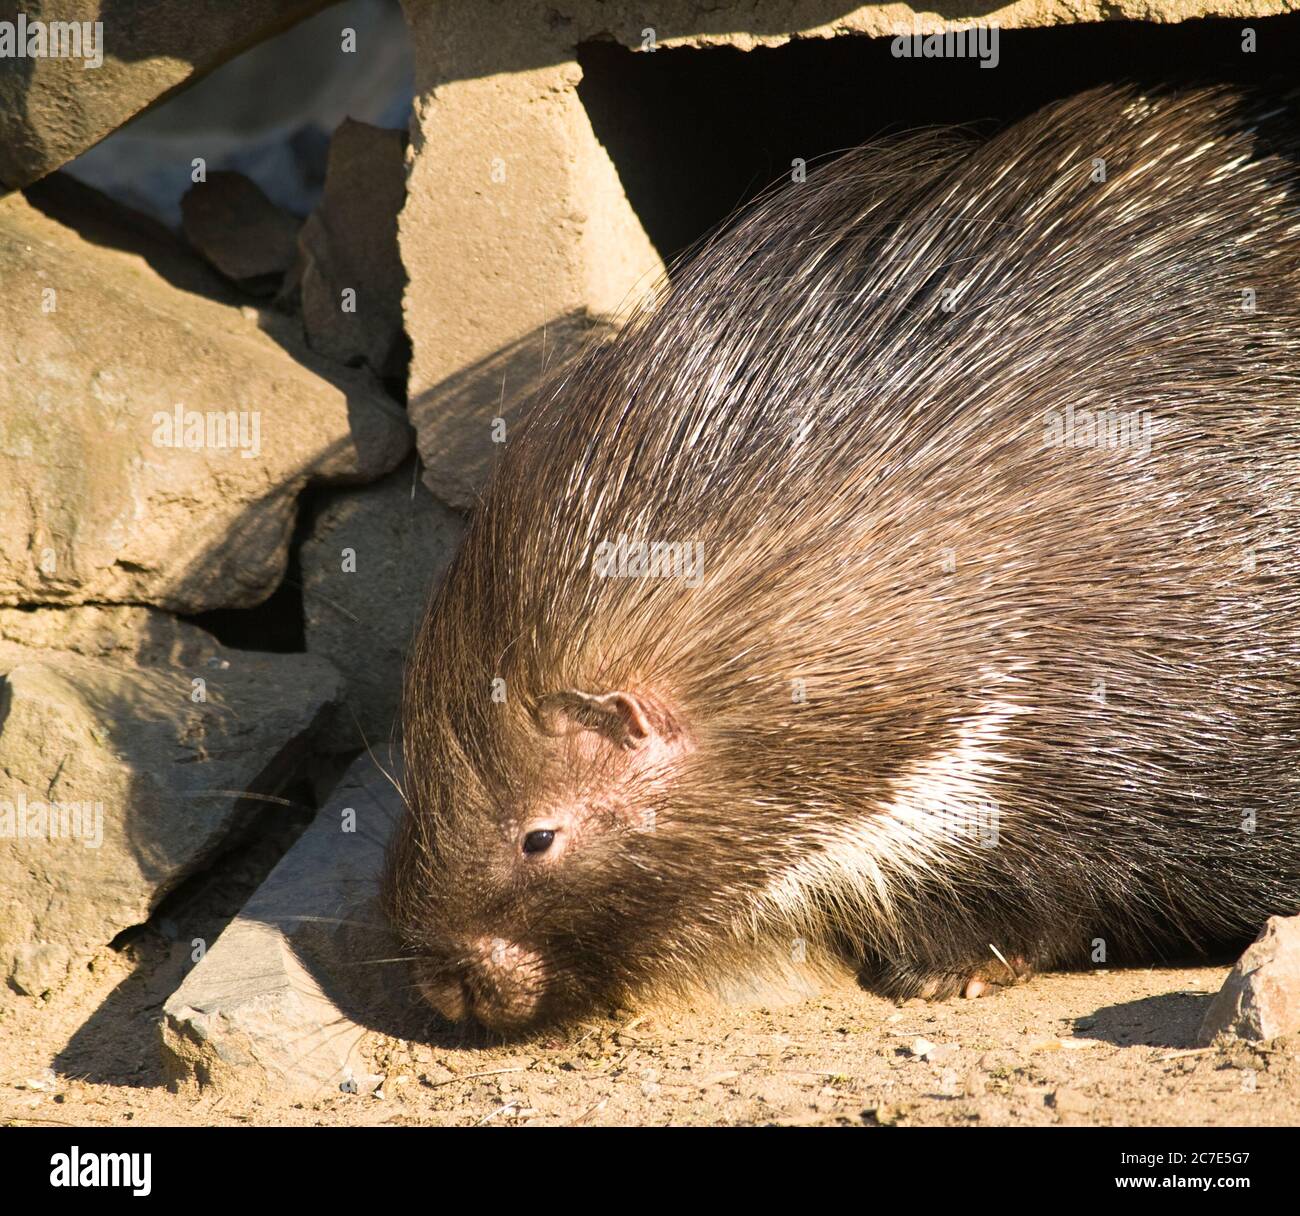 Indian crested porcupine - Hystrix indica Stock Photo